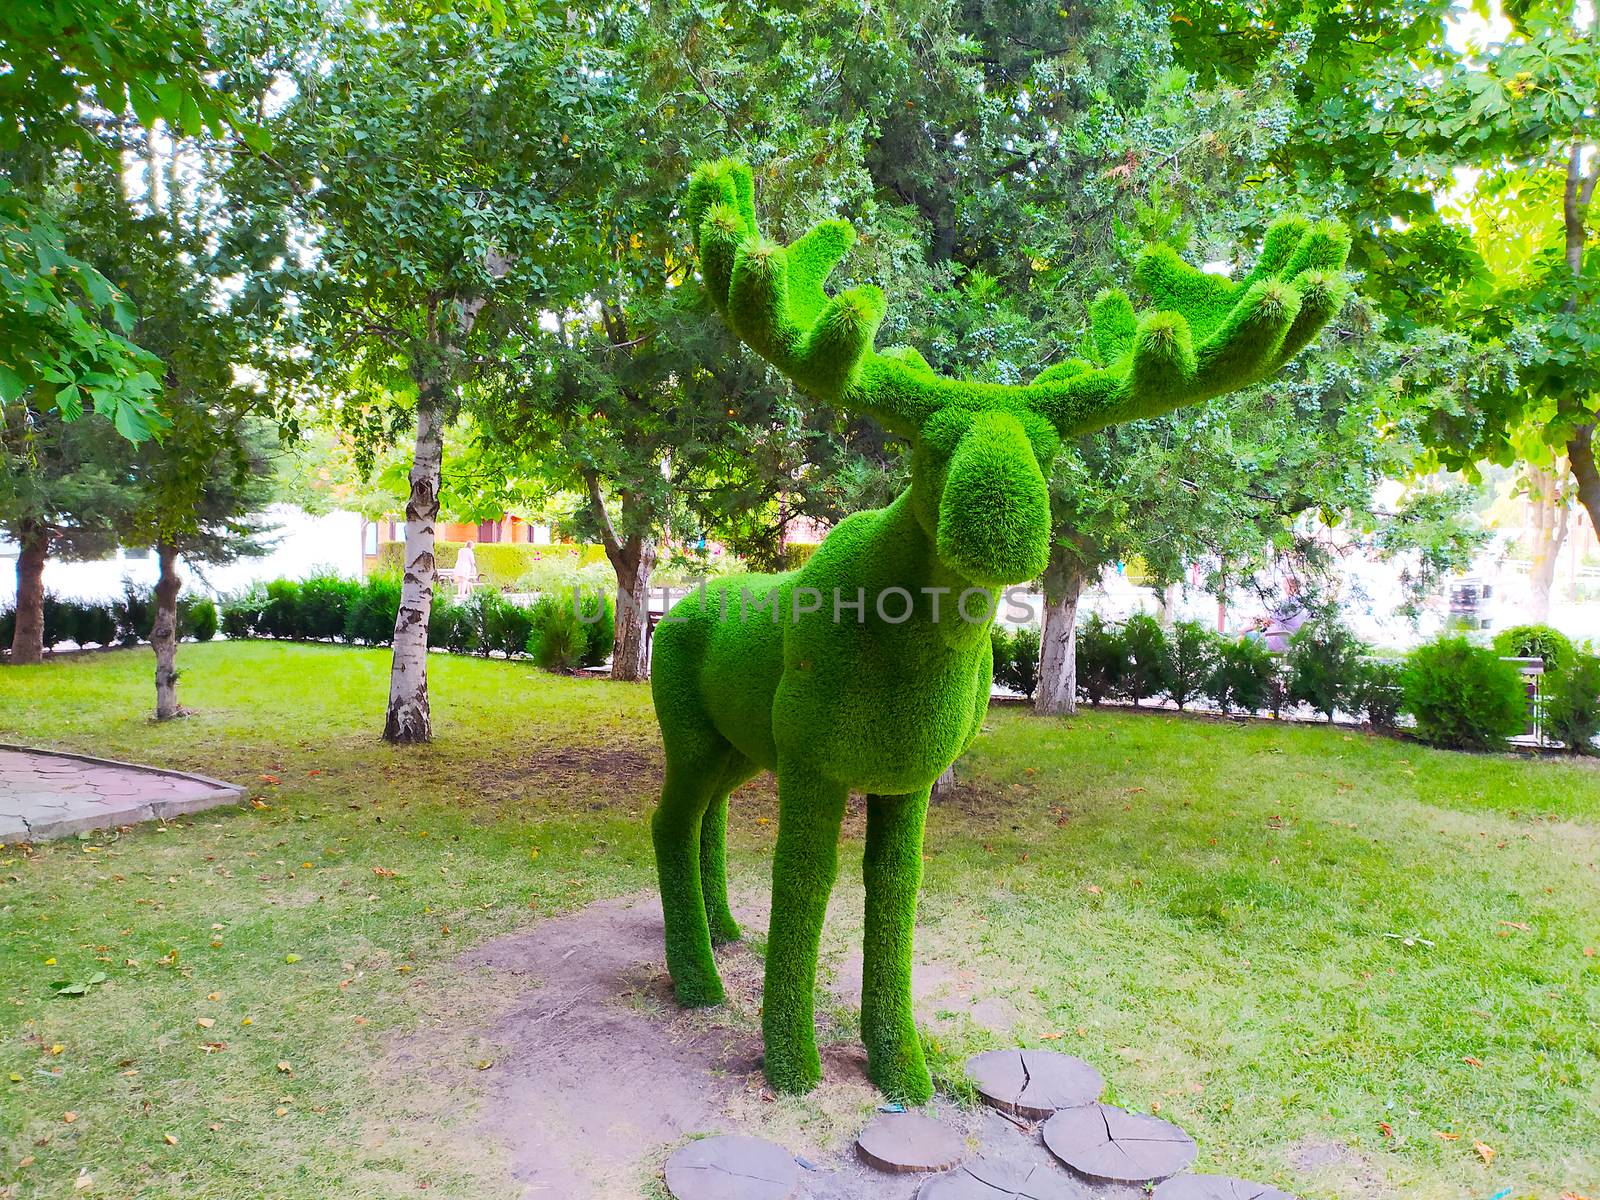 Figure of a deer with green faux fur horns in the Park.